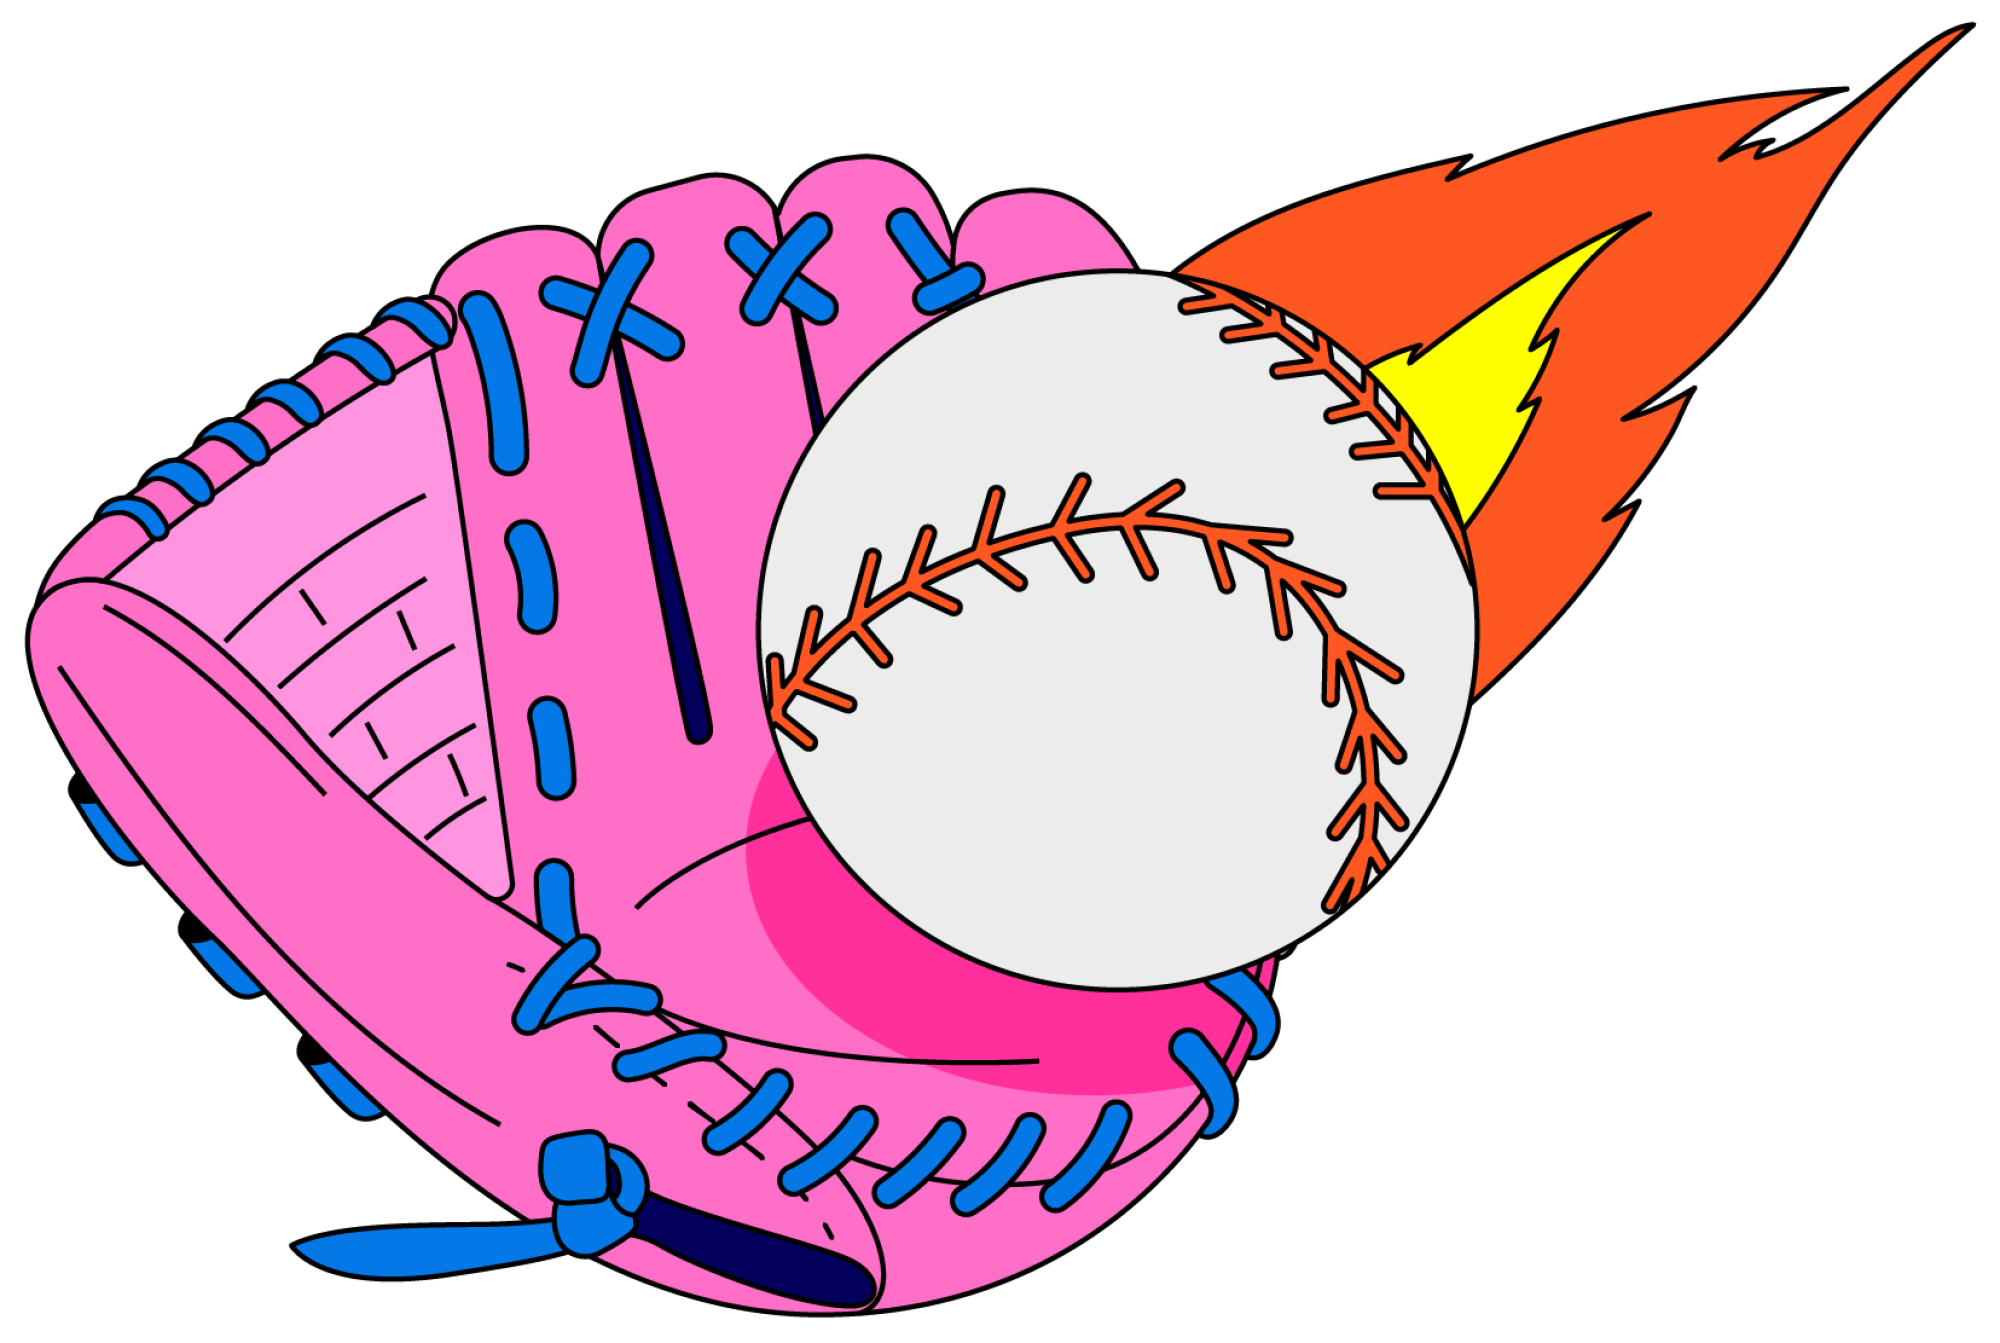 Illustration of a baseball mitt catching a baseball with a flaming trail